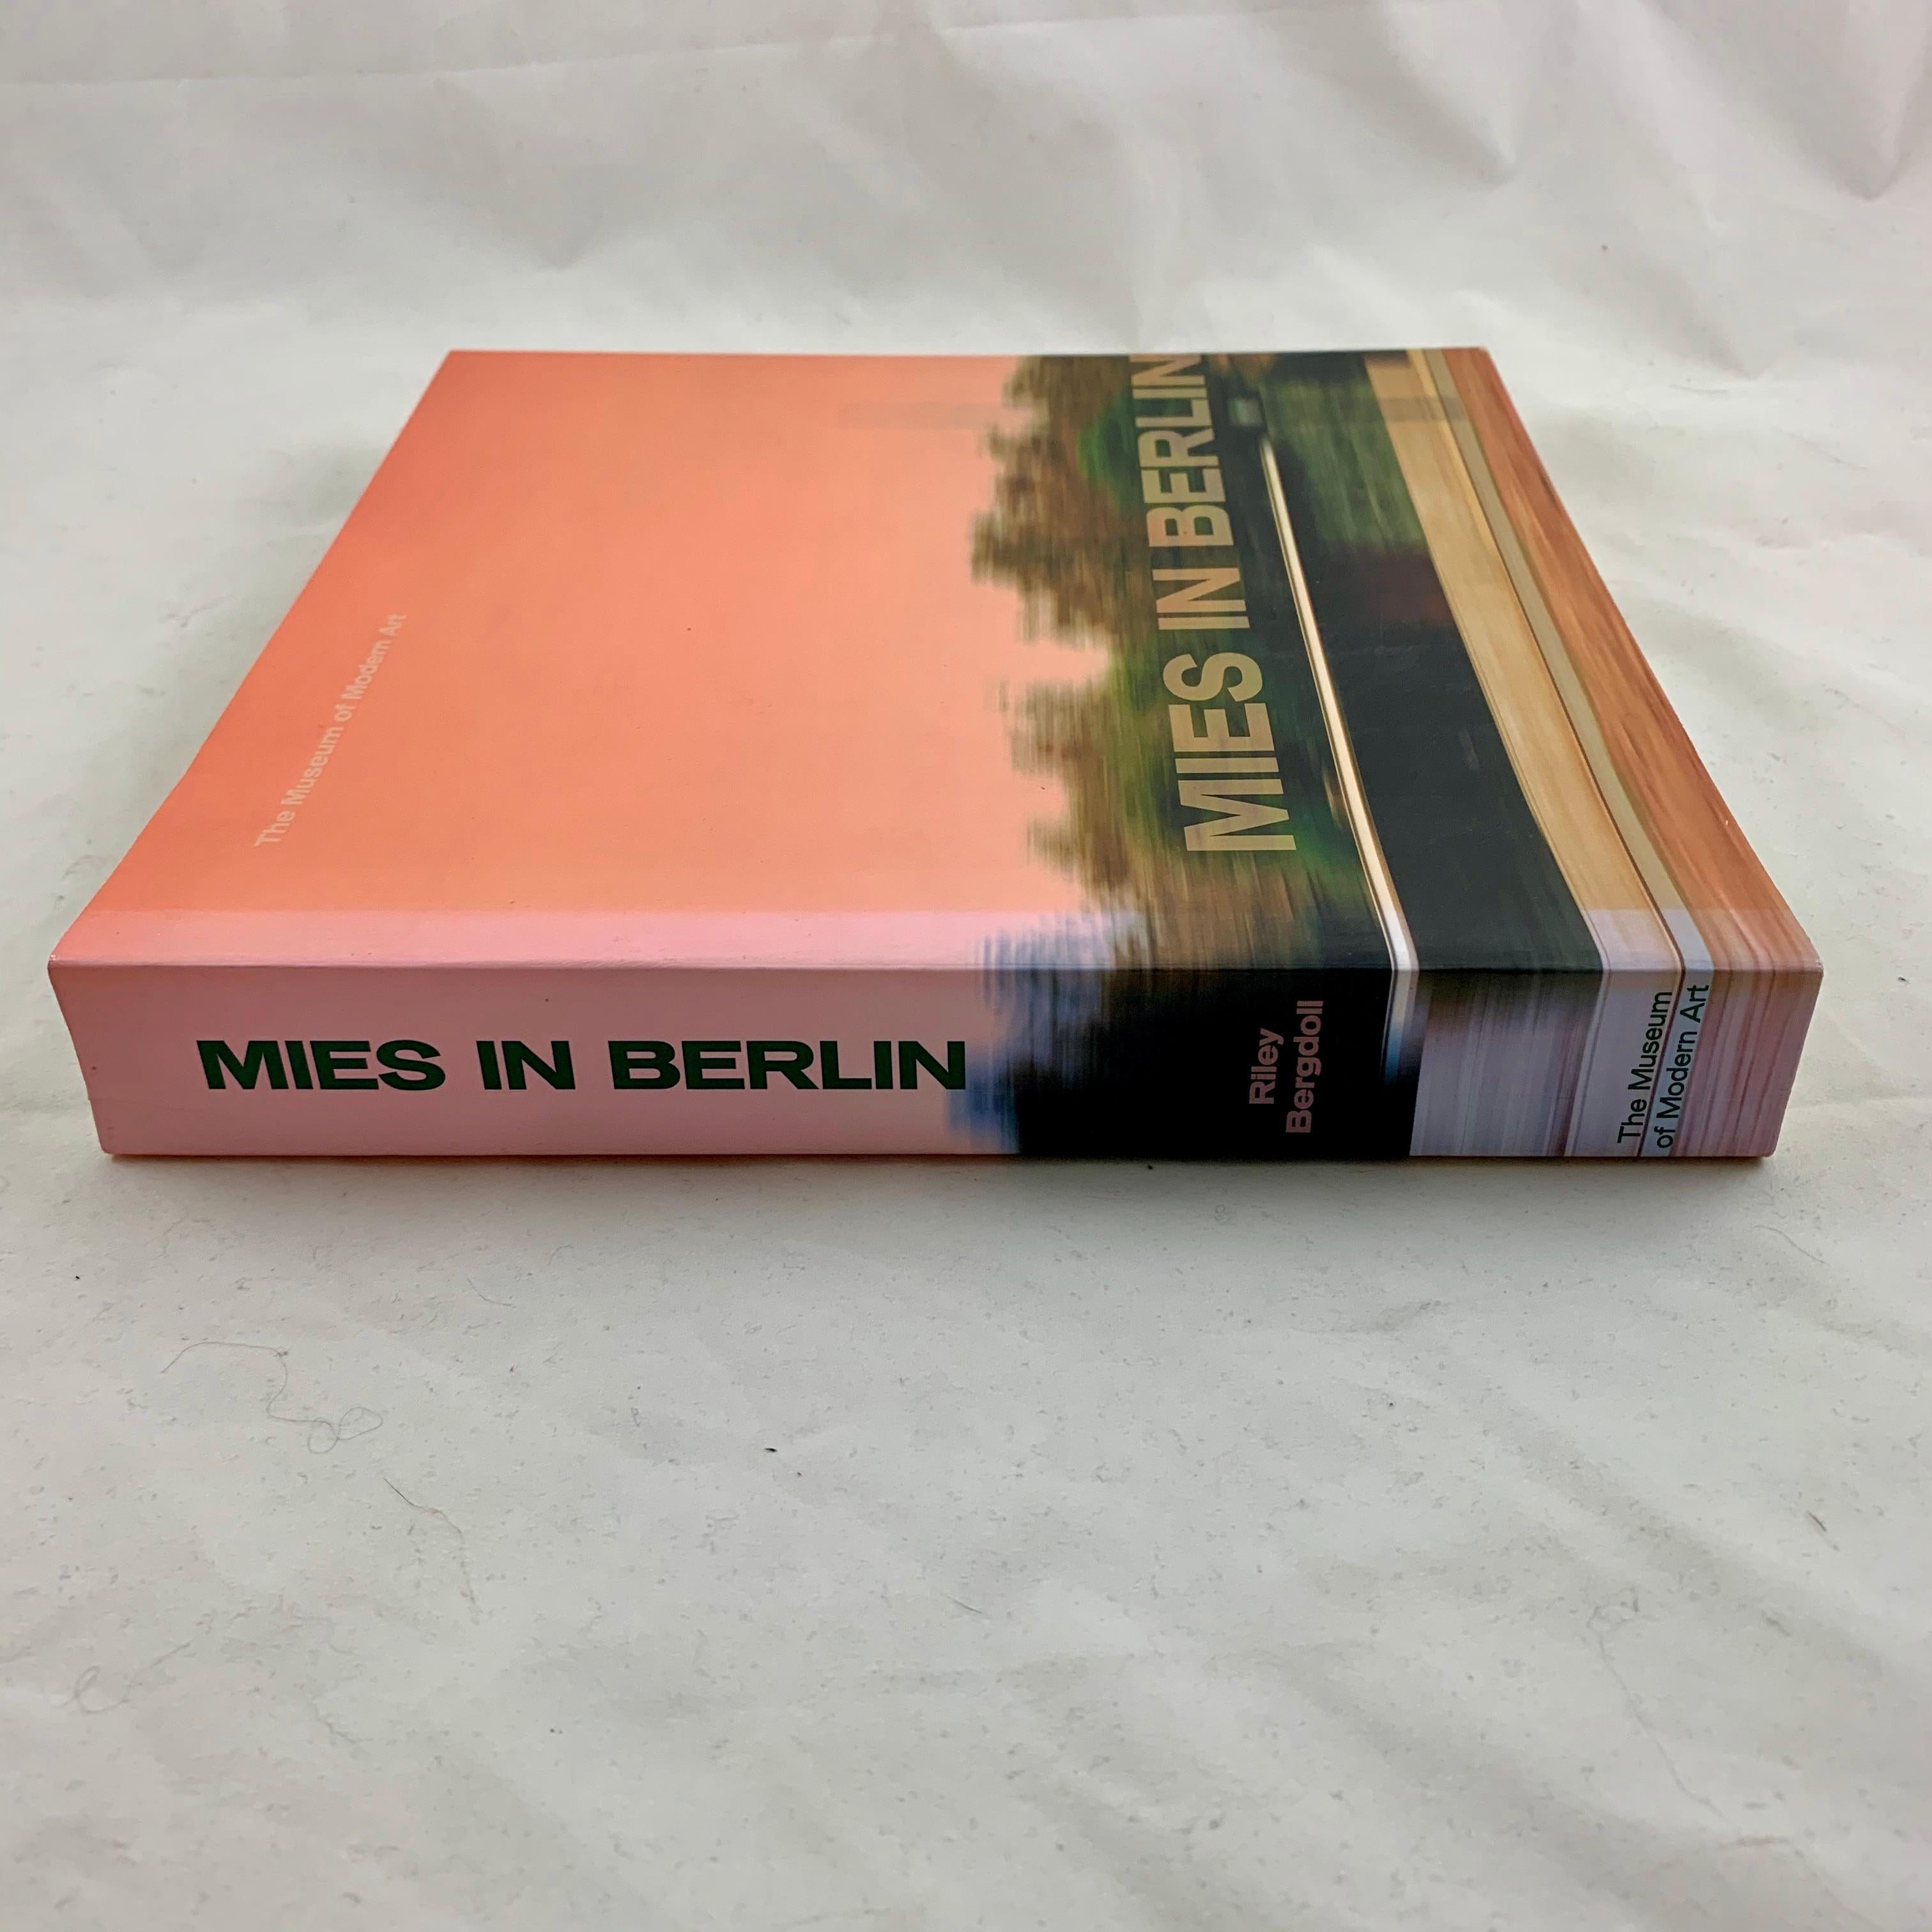 Mies in Berlin, published to accompany a groundbreaking 2001 exhibition at The Museum of Modern Art, New York.

Ludwig Mies van der Rohe, 1886-1969, was a Pioneer of modern architecture and the International style, and a former director of the